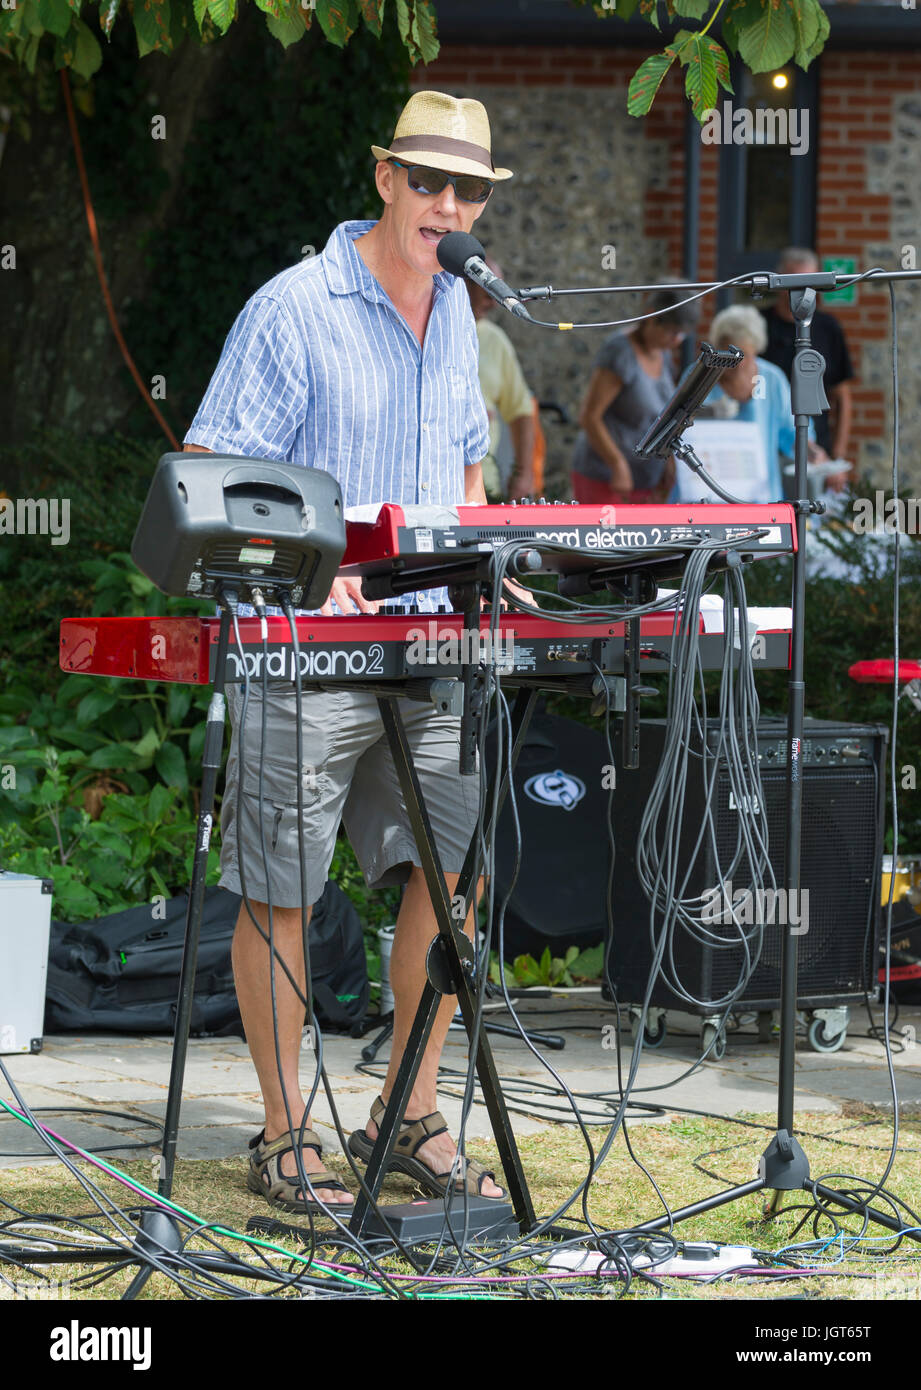 Man in a music band standing outside playing the keyboard. Stock Photo